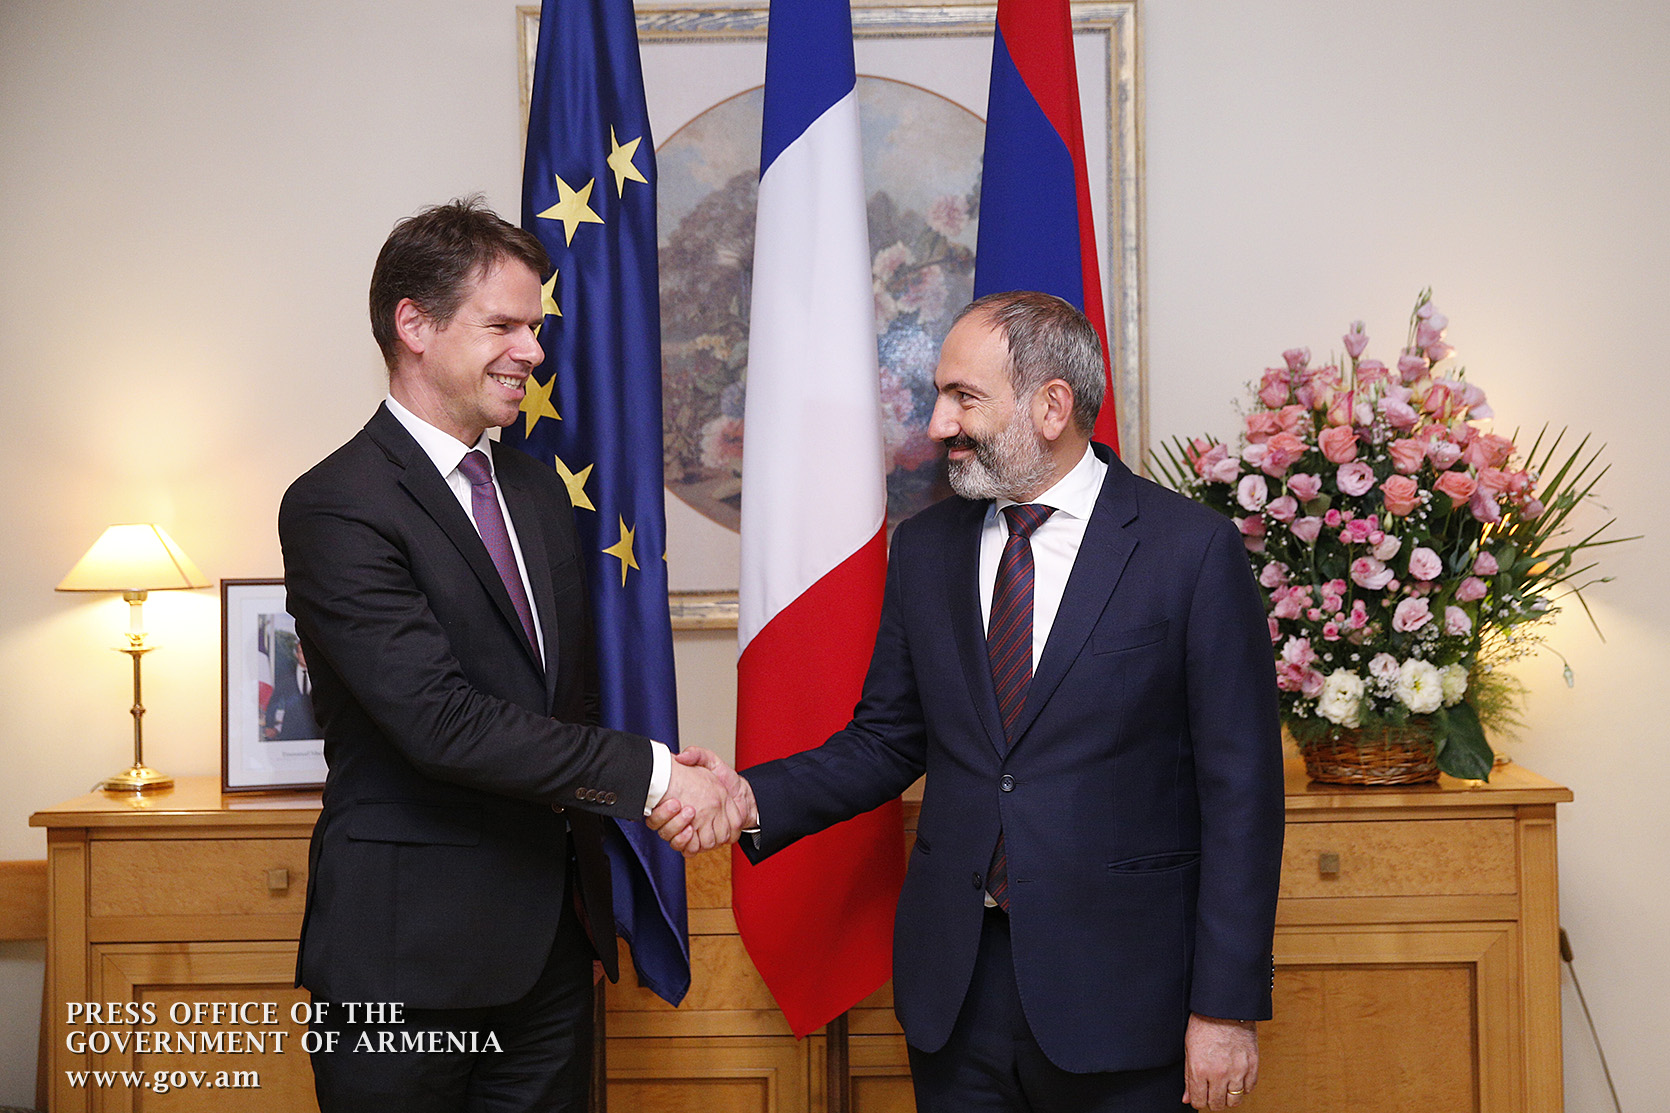 Prime Minister congratulates top leadership of France on National Holiday and visits French Embassy in Armenia